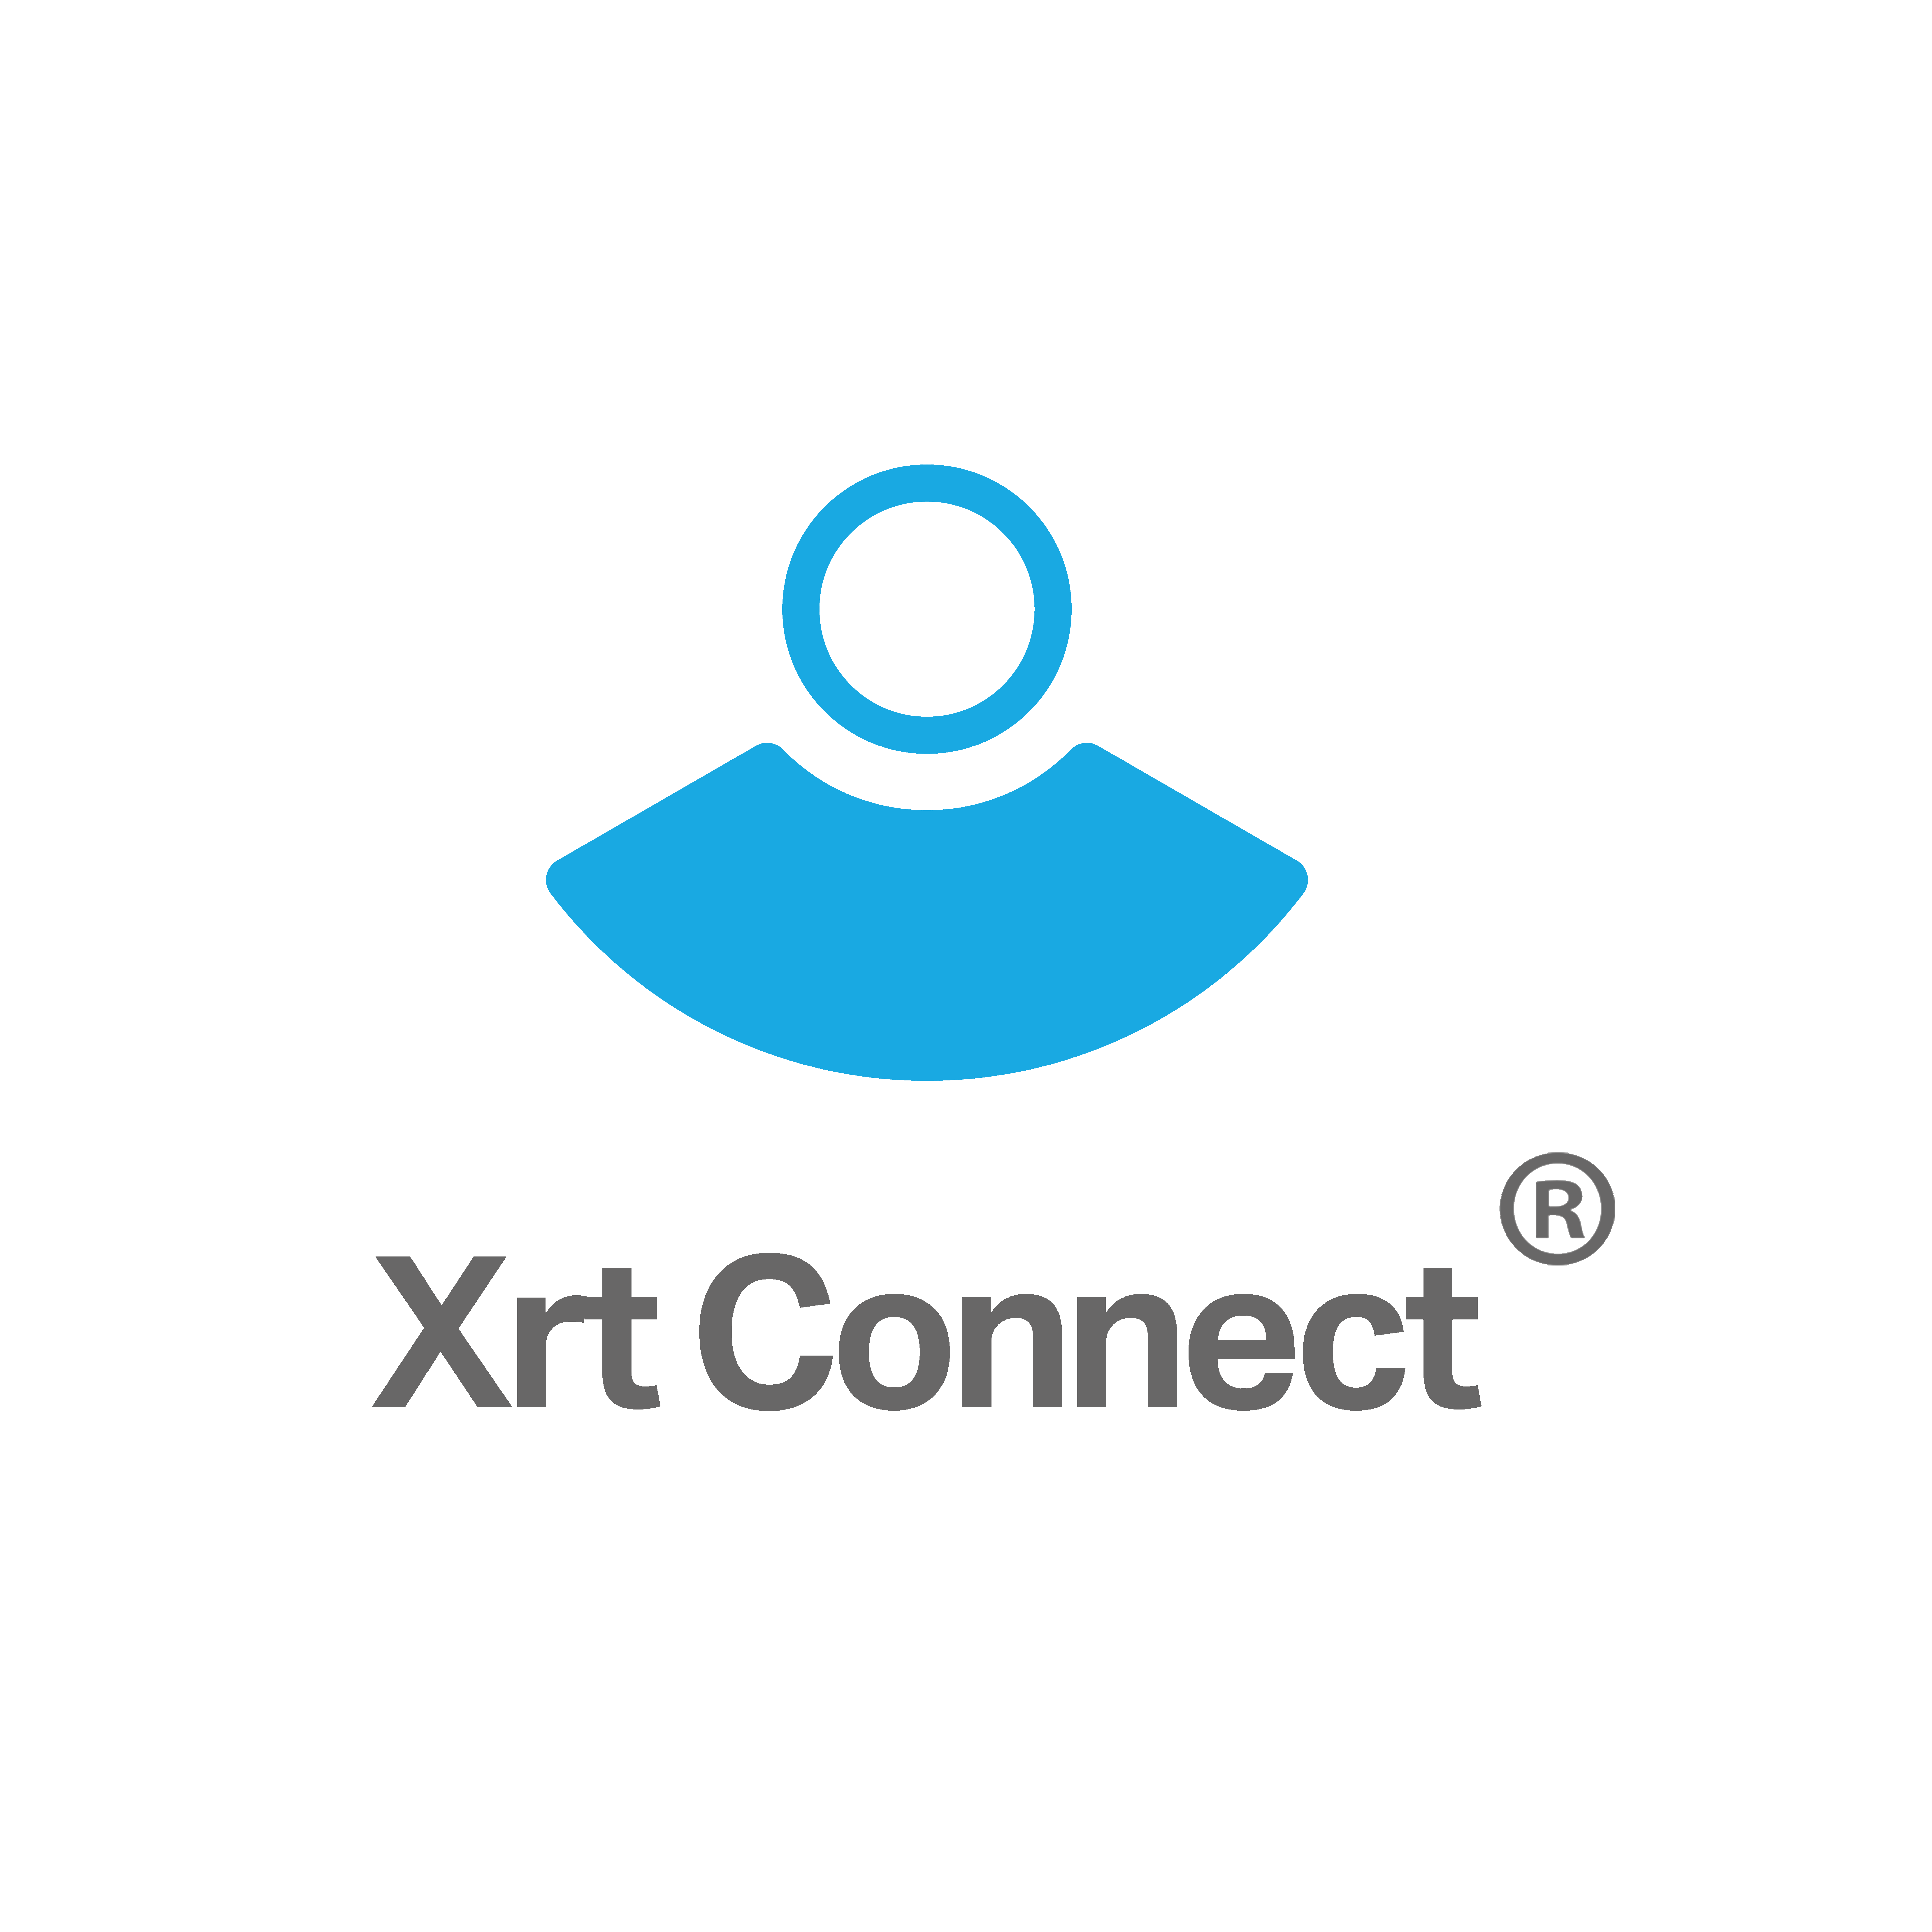 Xrt Connect